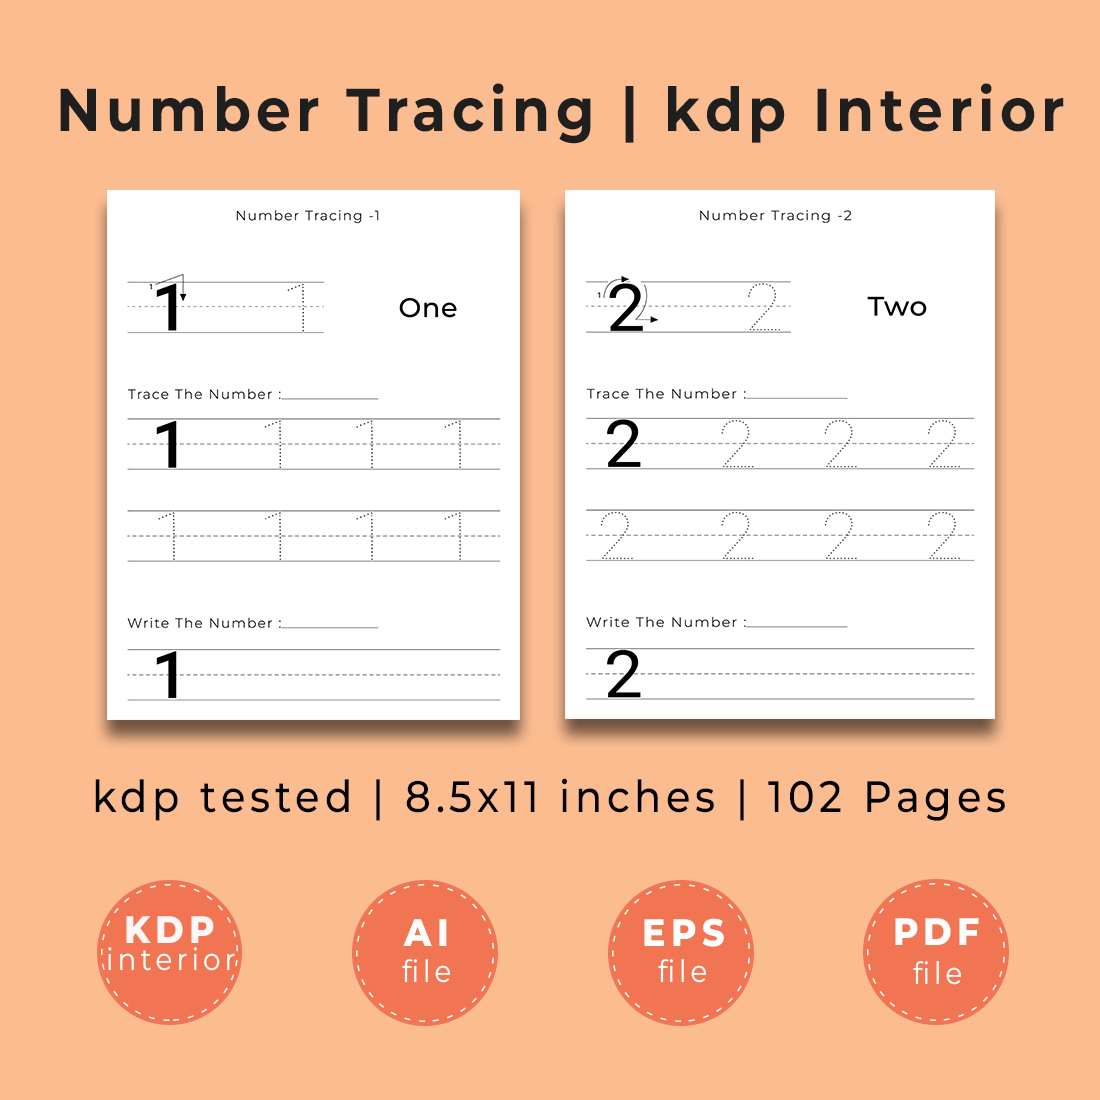 Number Tracing | Kdp Interior cover image.